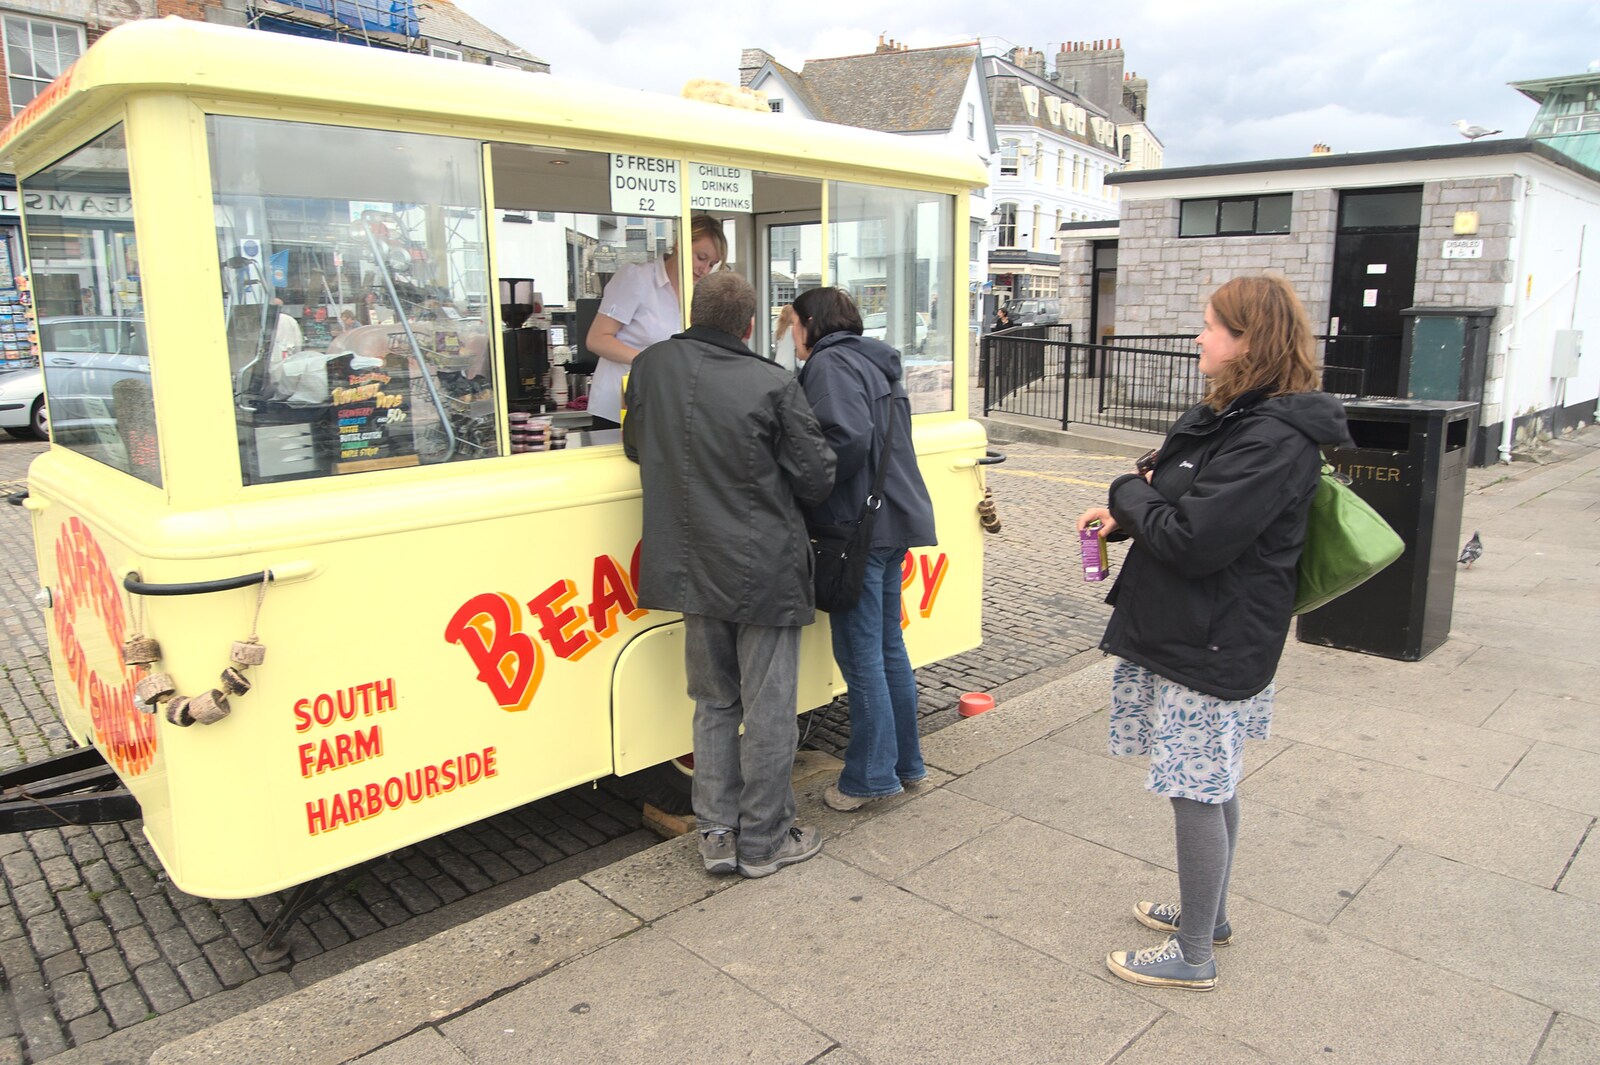 Isobel queues up for doughnuts from A Camper Van Odyssey: Charmouth, Plymouth, Dartmoor and Bath - 20th June 2011